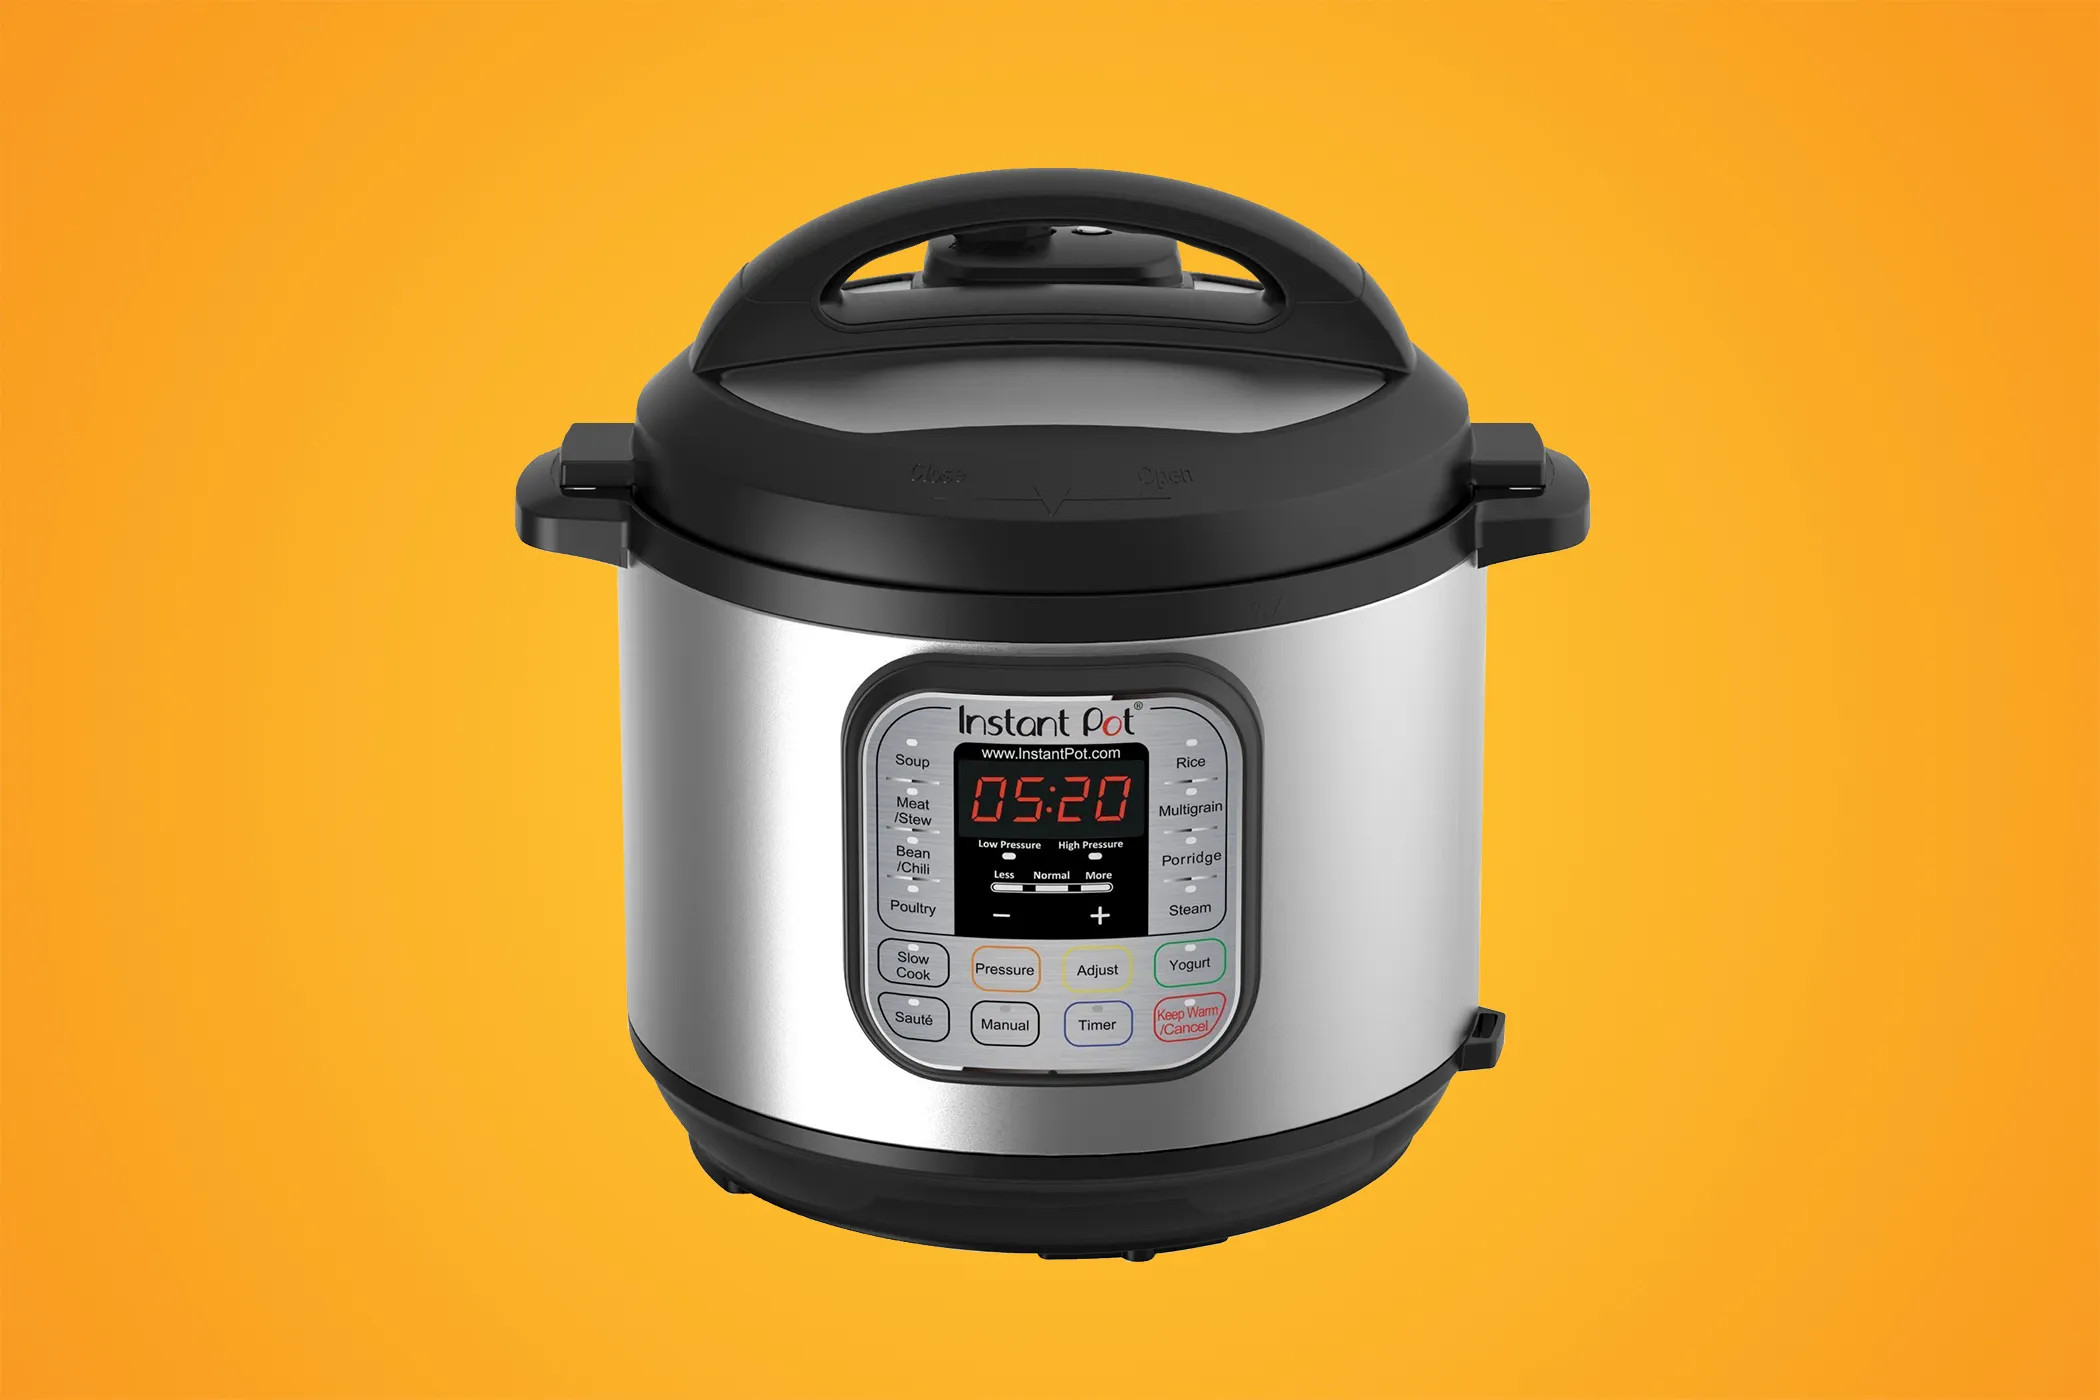 The popular Instant Pot Duo 60 7-in-1 is temporarily at a very low